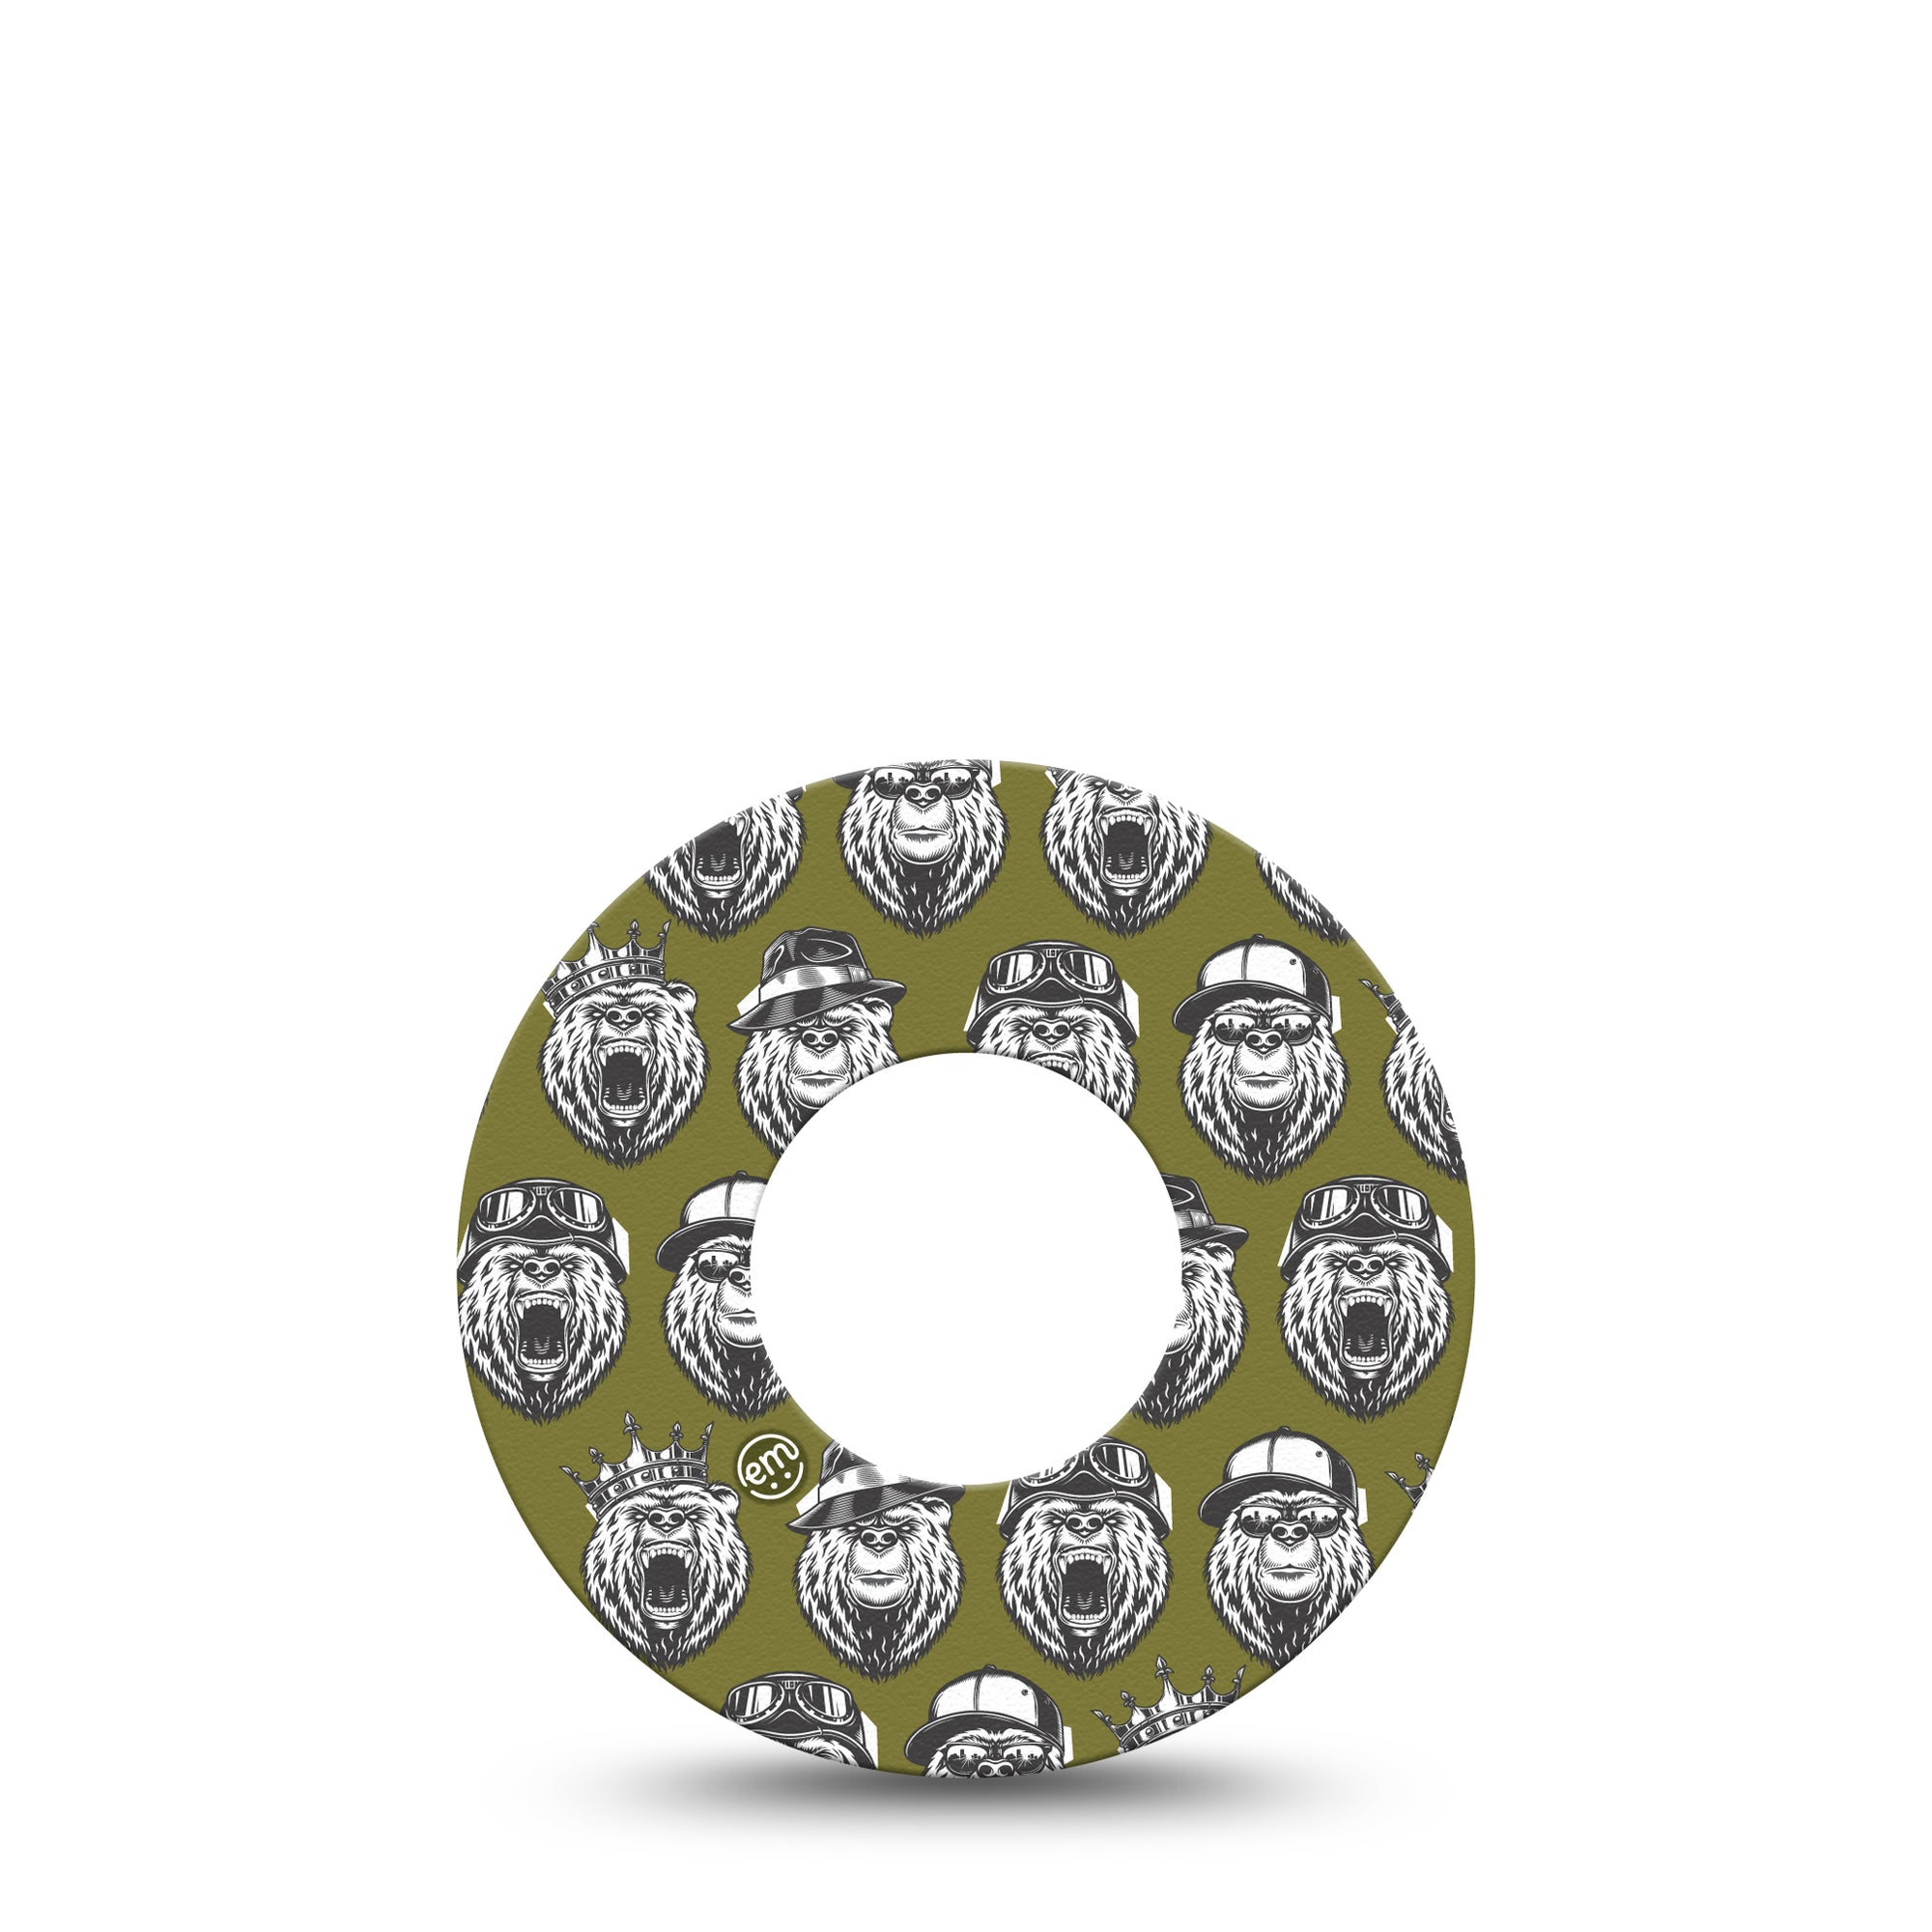 ExpressionMed Grizzly Bears Libre Tape 